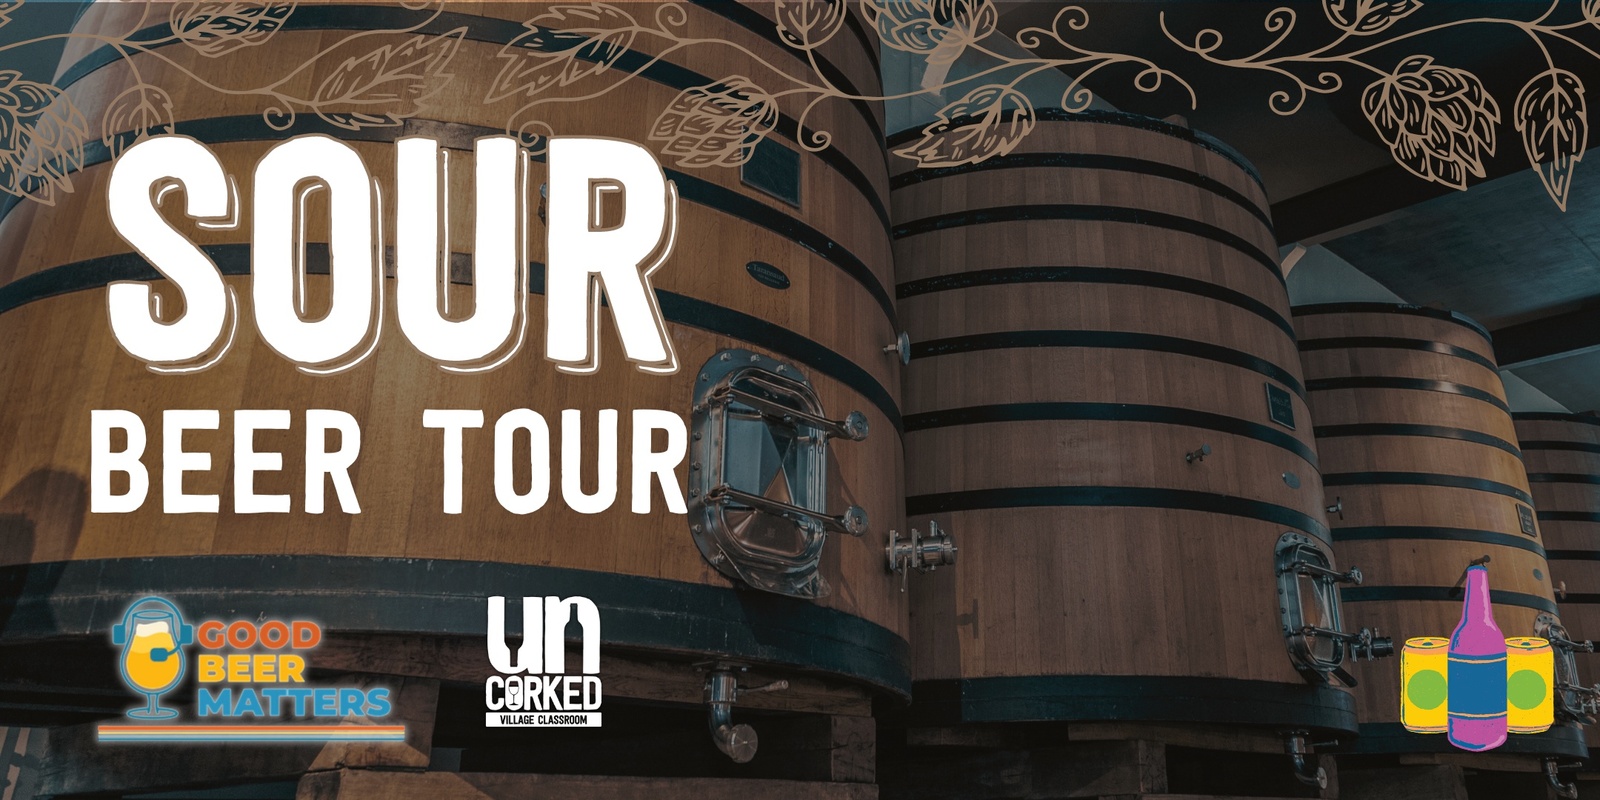 Banner image for Sour Beer Tour at UnCorked Village Classroom